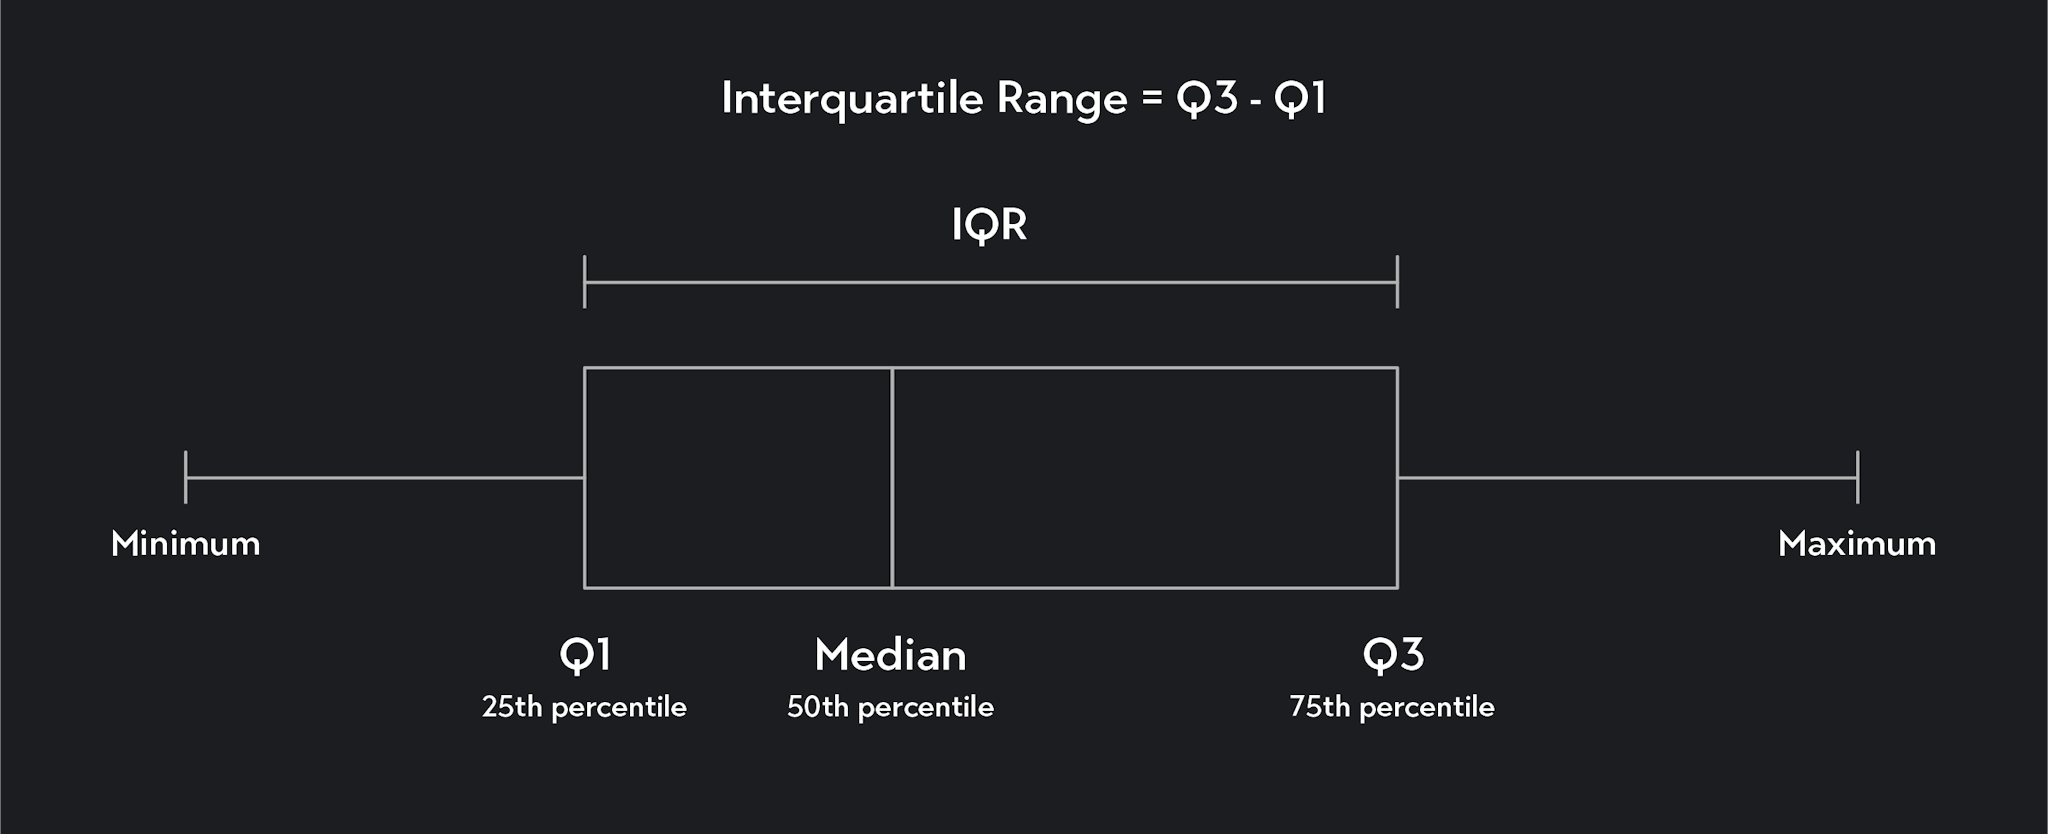 Graphic of the Interquartile Range or IQR